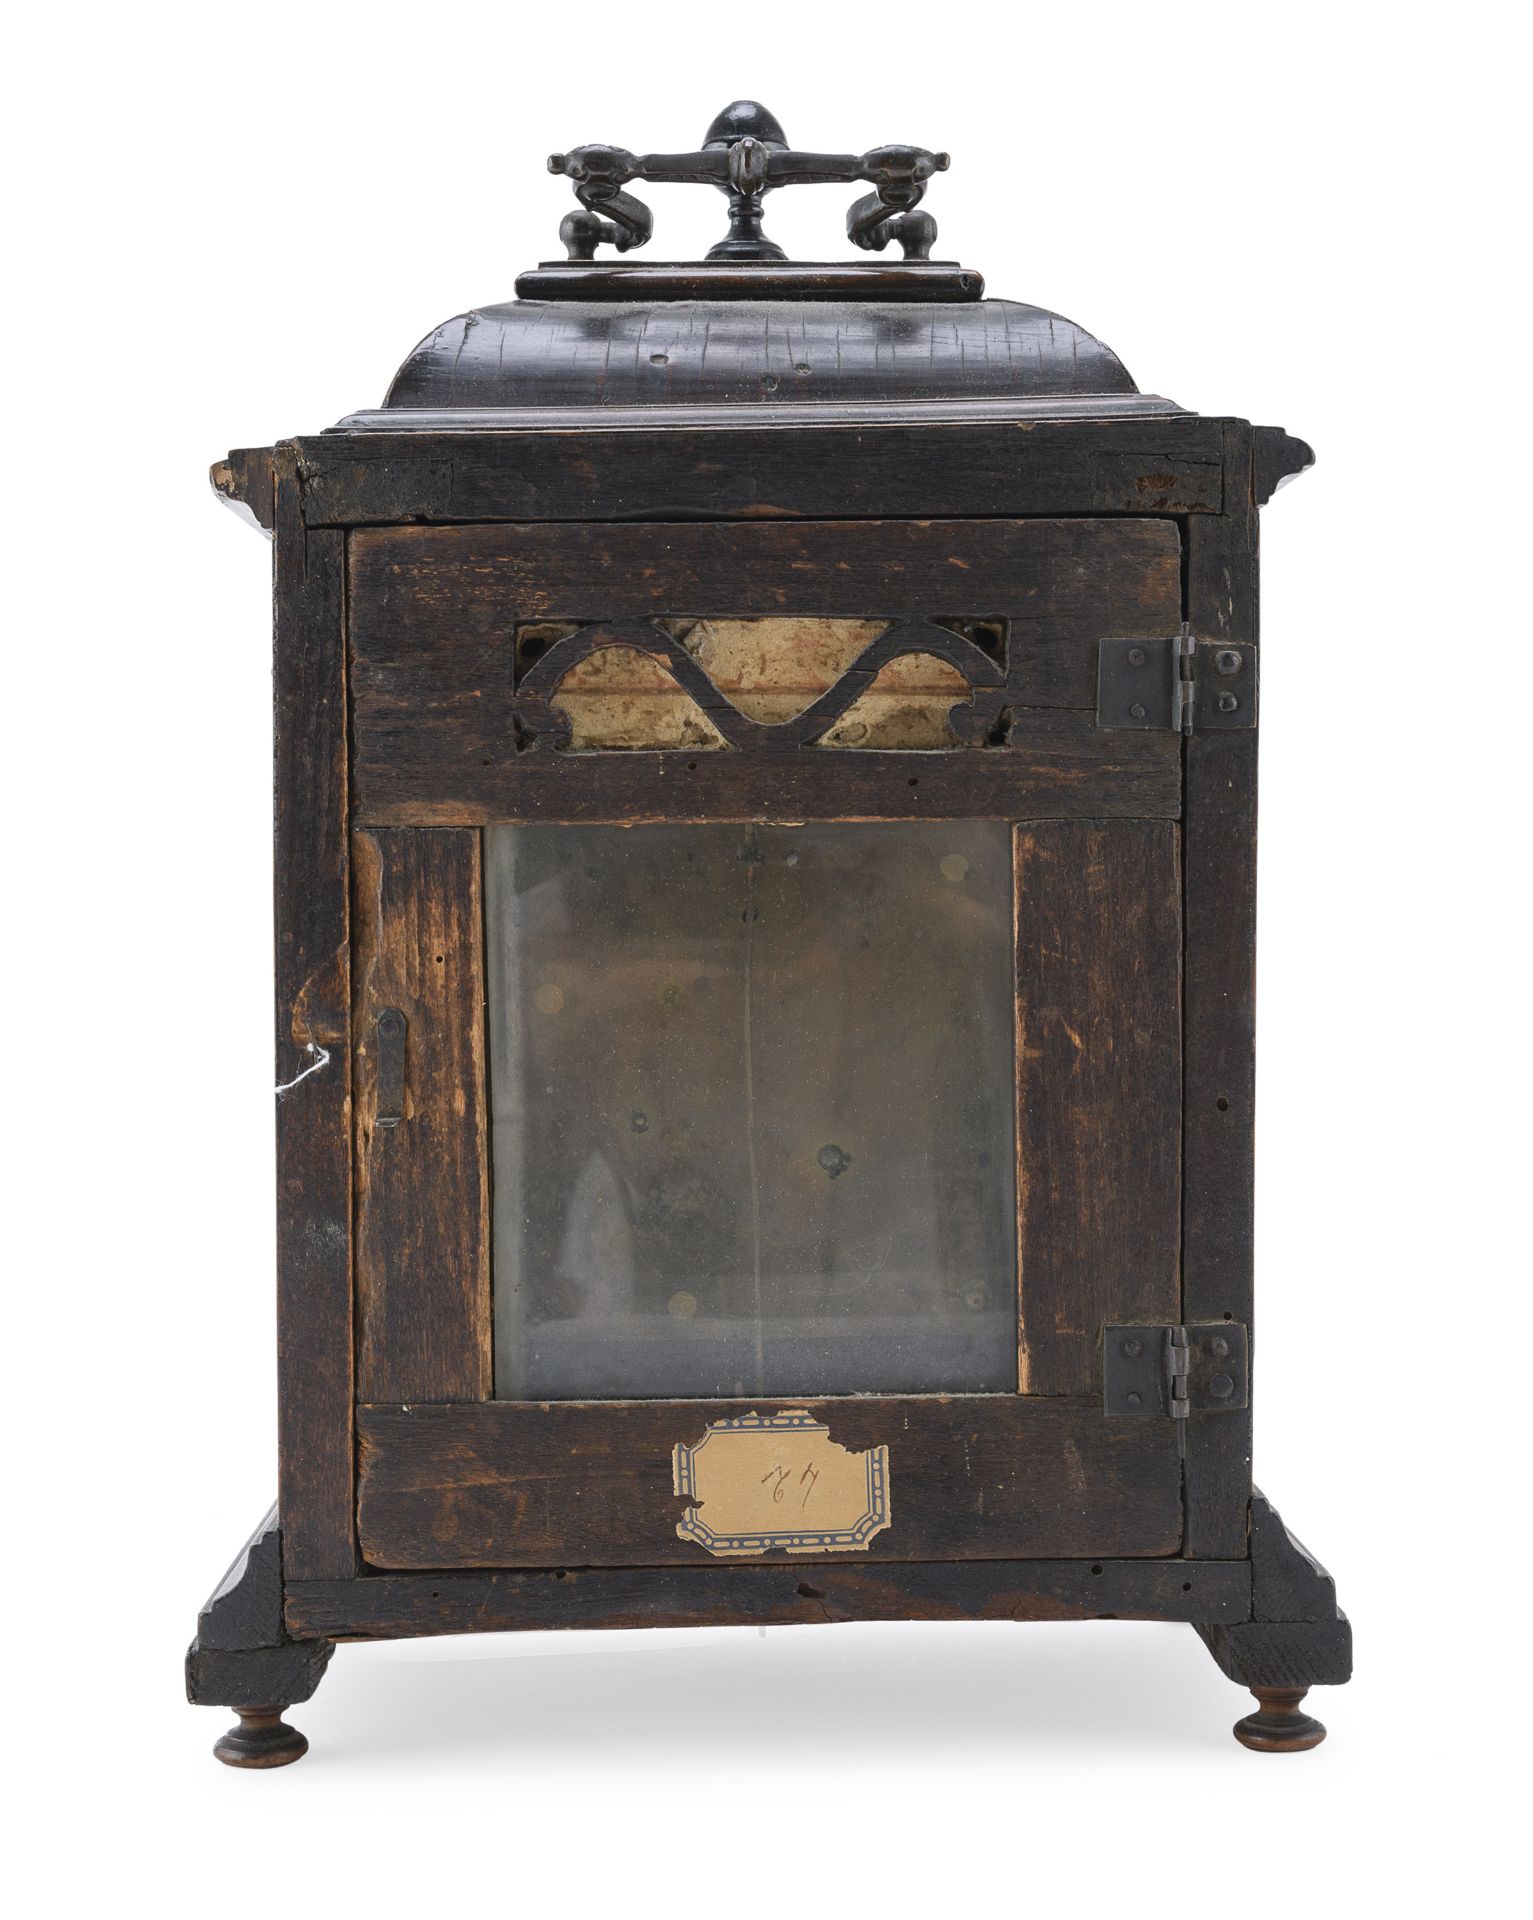 SMALL TABLE CLOCK 18th CENTURY - Image 2 of 2